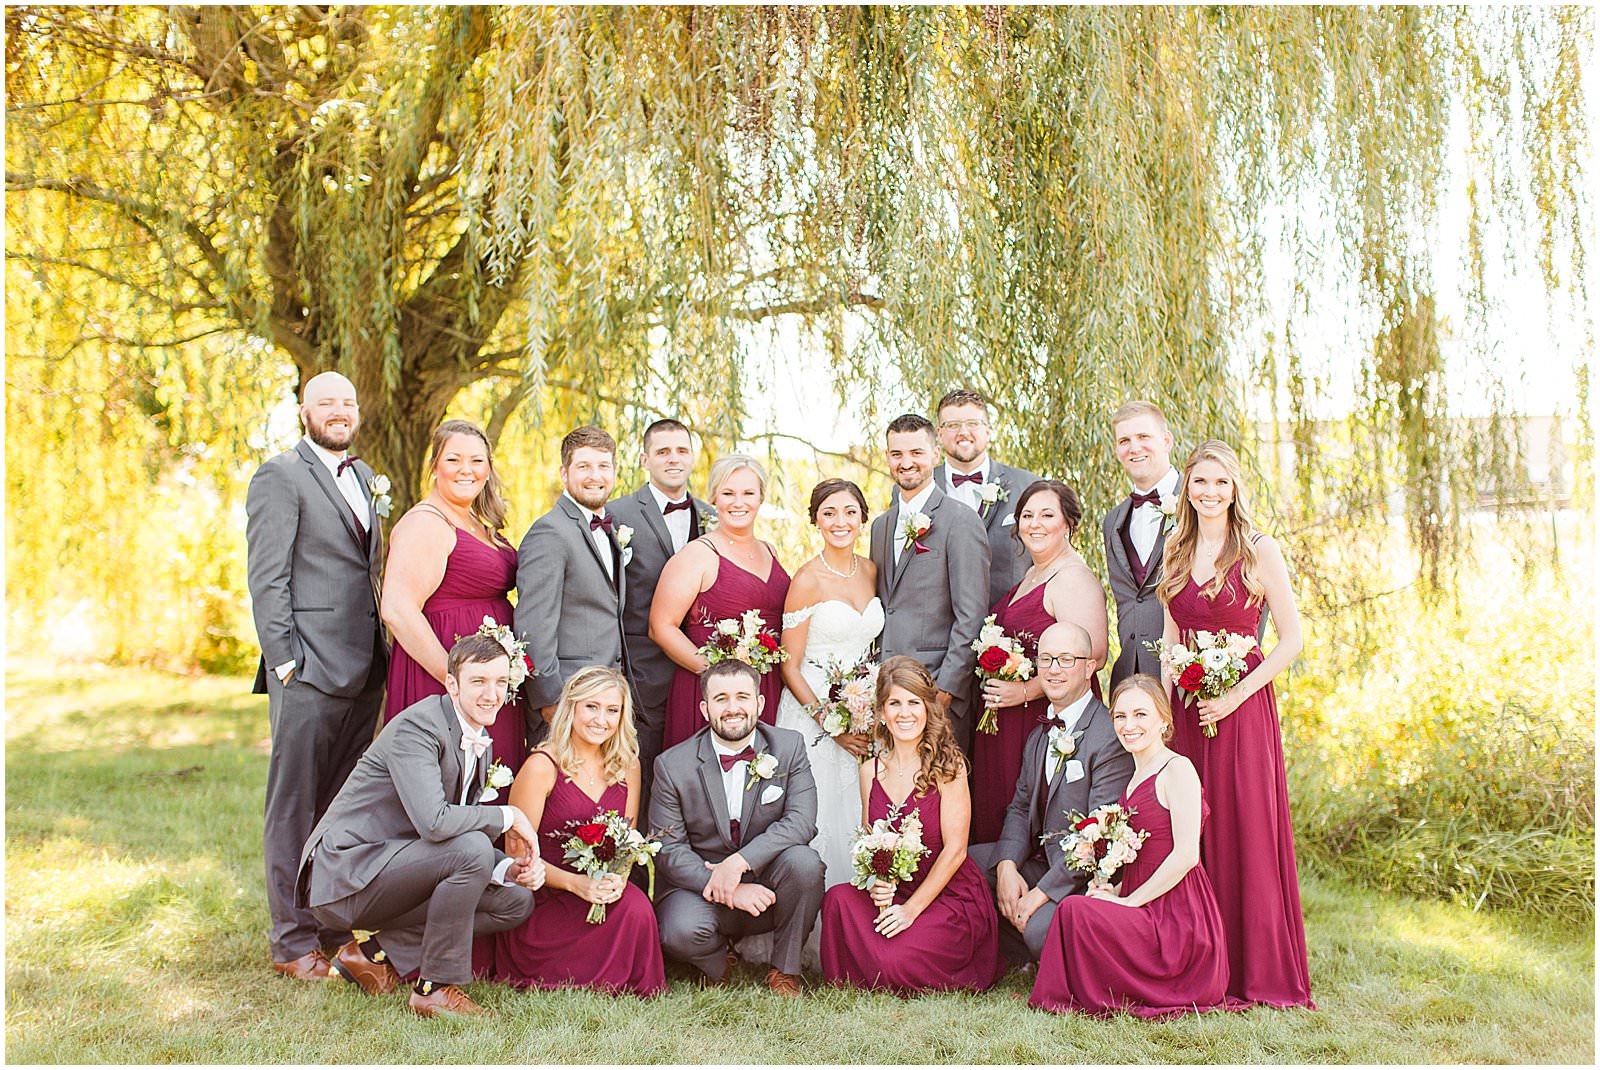 A Stunning Fall Wedding in Indianapolis, IN |. Sally and Andrew | Bret and Brandie Photography 0086.jpg